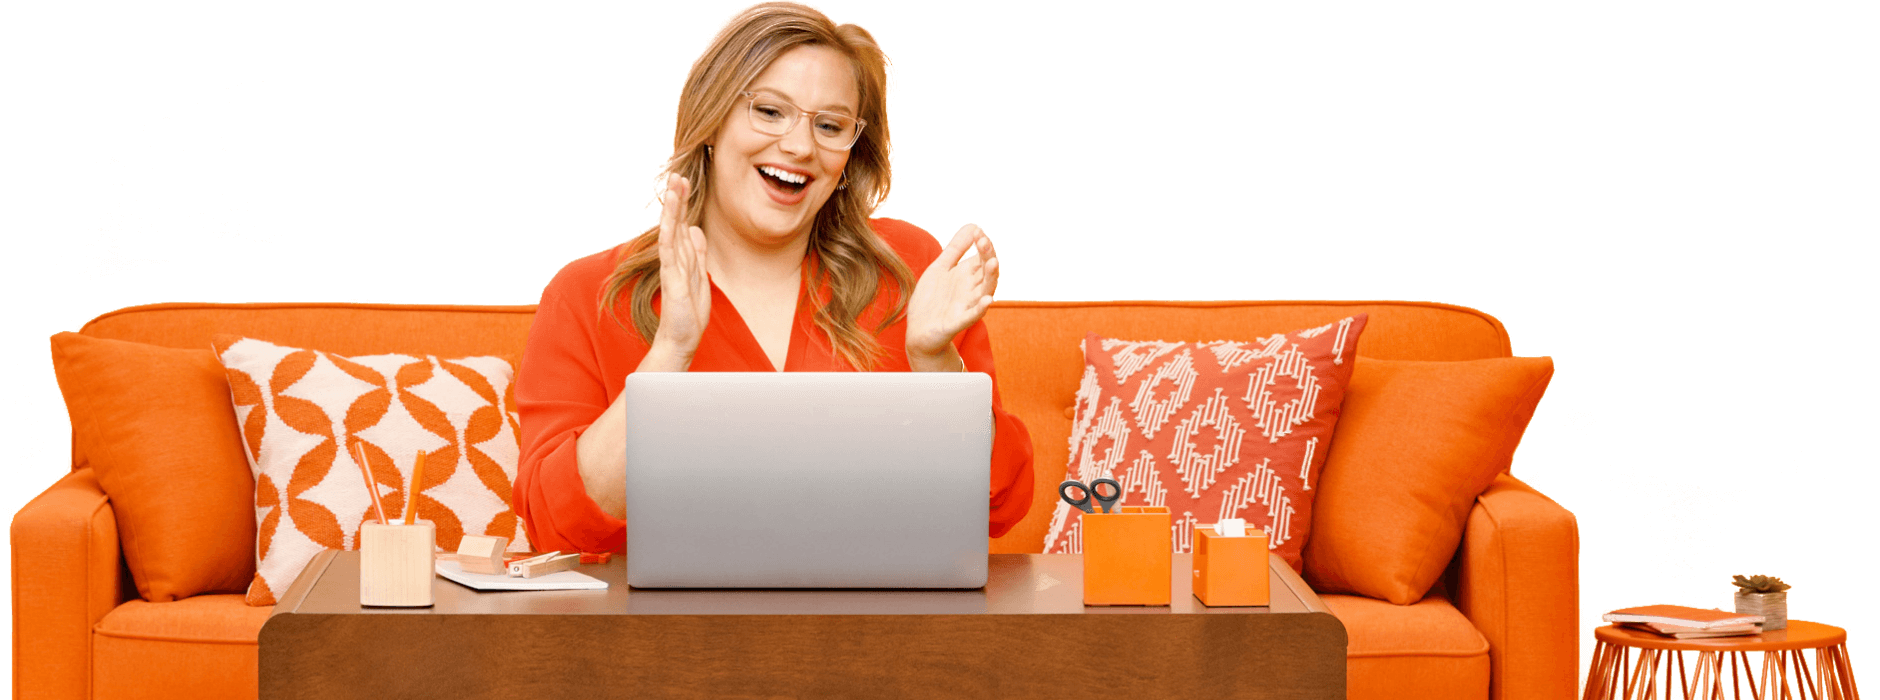 Teacher loves teaching English online with VIPKid because she can work from home at her own schedule